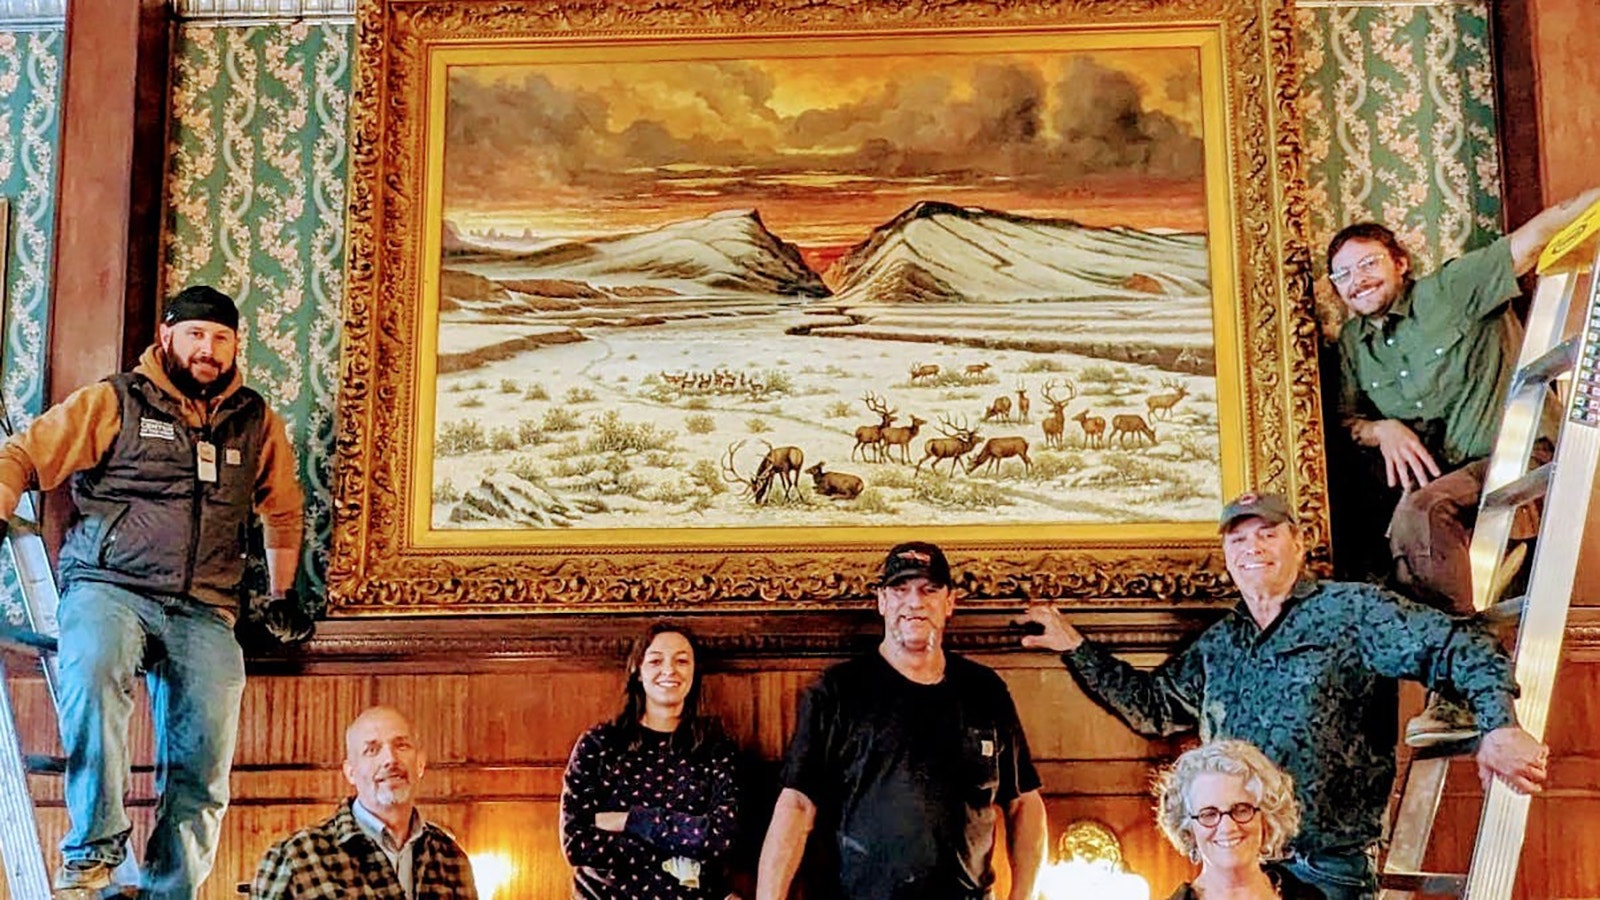 After decades away, "Shoshone Canyon" hangs again at Cody's iconic Irma Hotel. The large painting was cleaed with human spit to remove decades of grime and restore it to its historic glory.